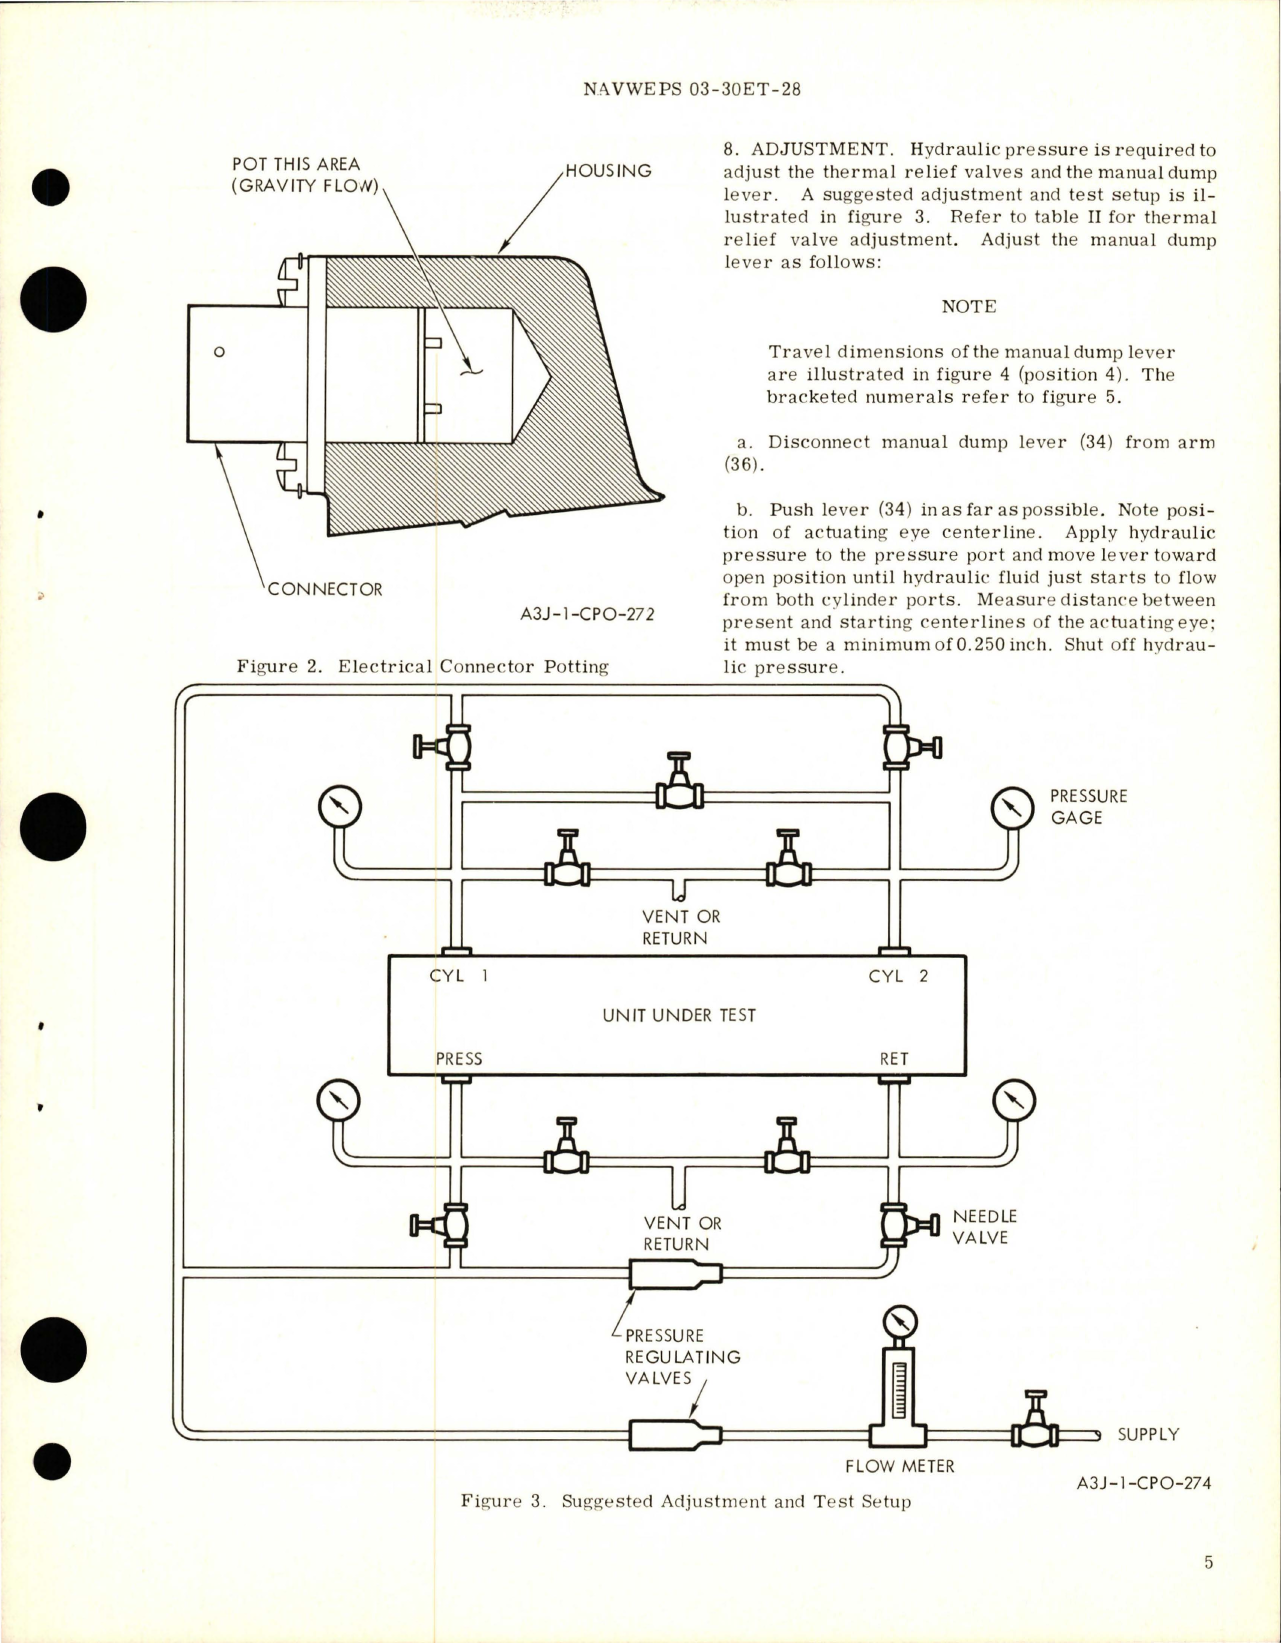 Sample page 7 from AirCorps Library document: Overhaul Instructions with Parts Breakdown for Hydraulic Solenoid Control Valve w Manual Dump - Part 54900